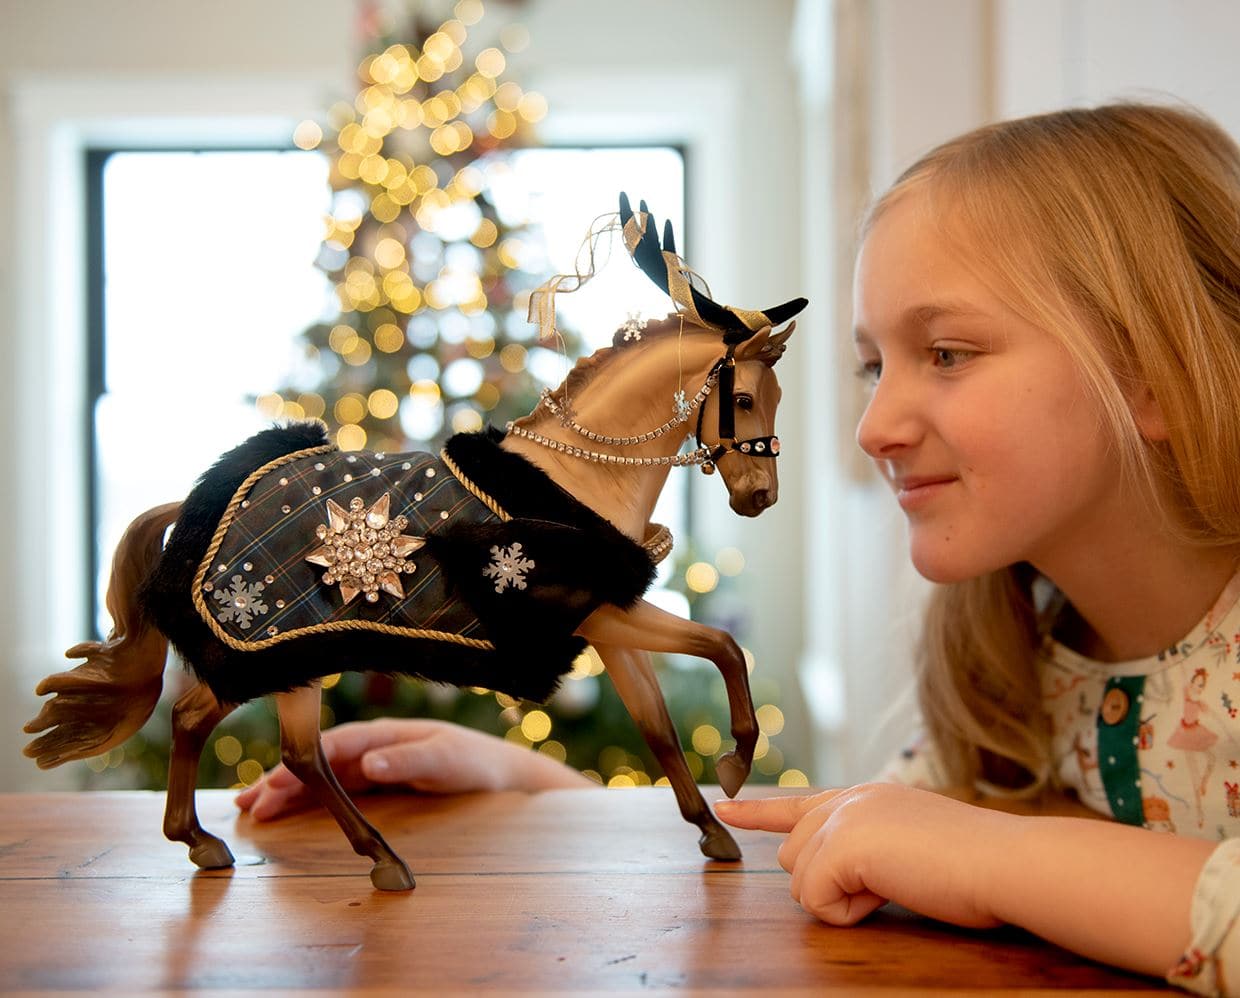 Breyer® Highlander 2023 Holiday Holiday Horse - For Horse Lovers and a  Western Lifestyle